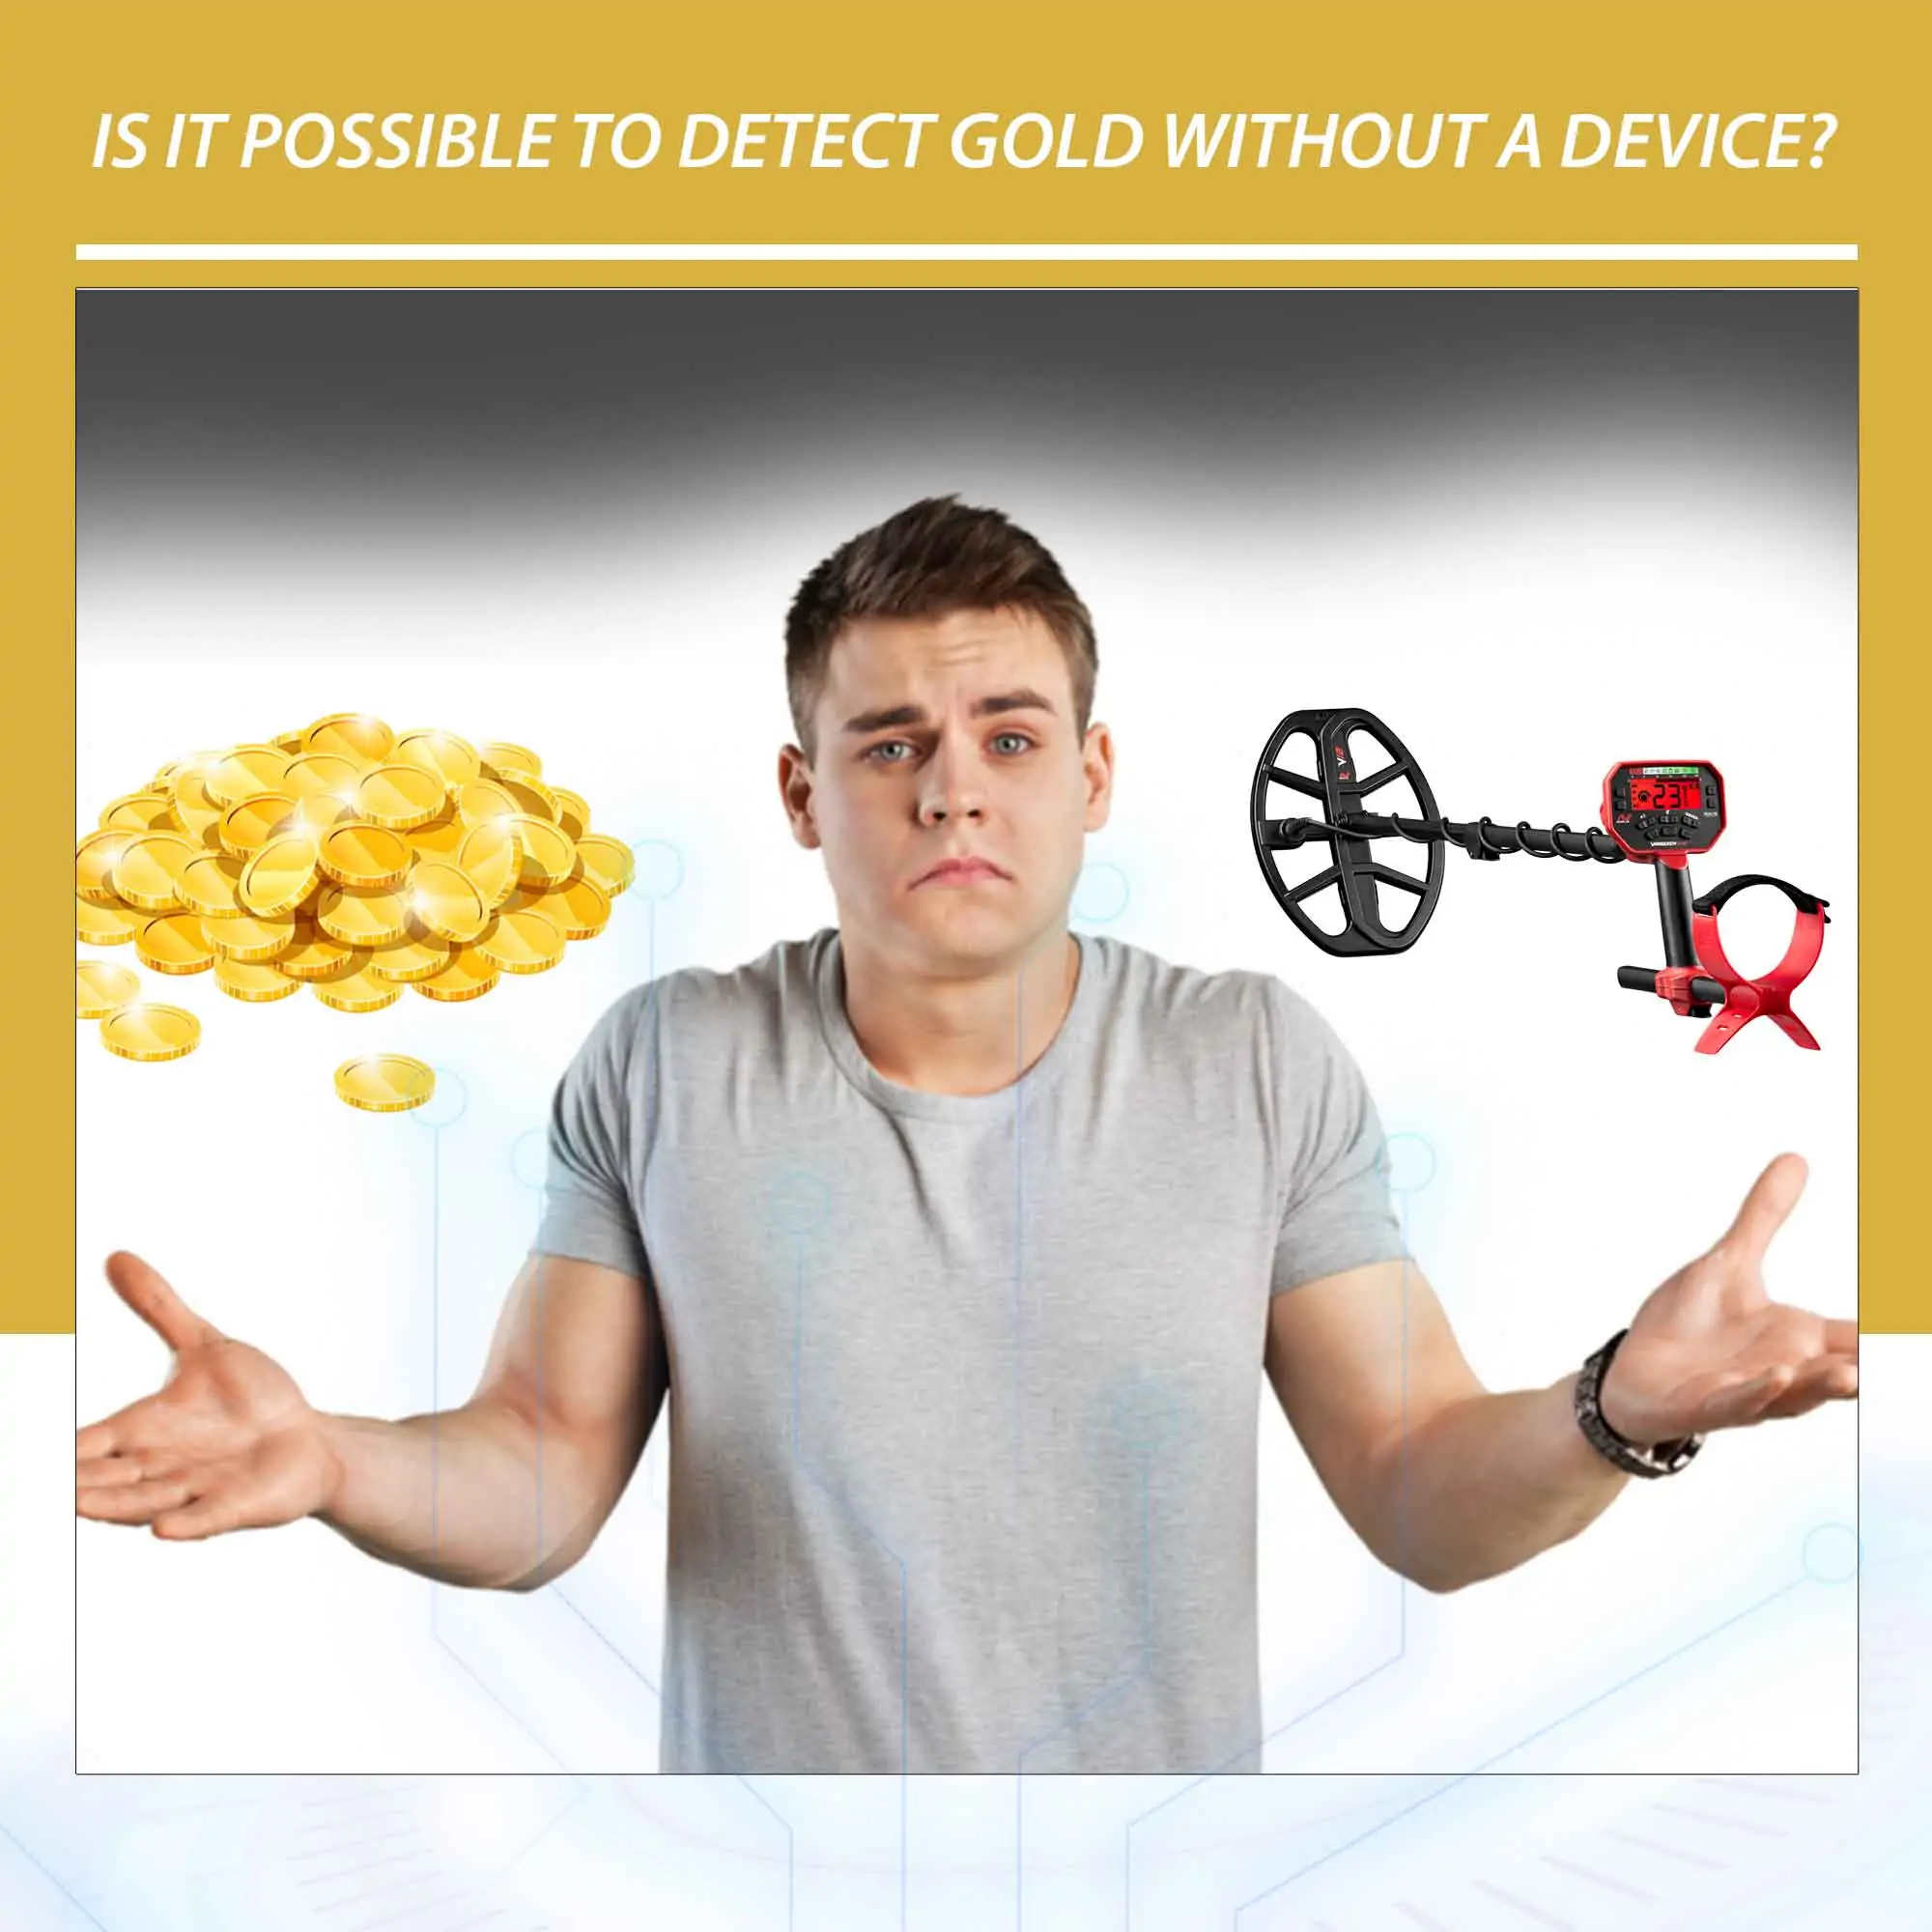 Is it possible to detect gold without a device?